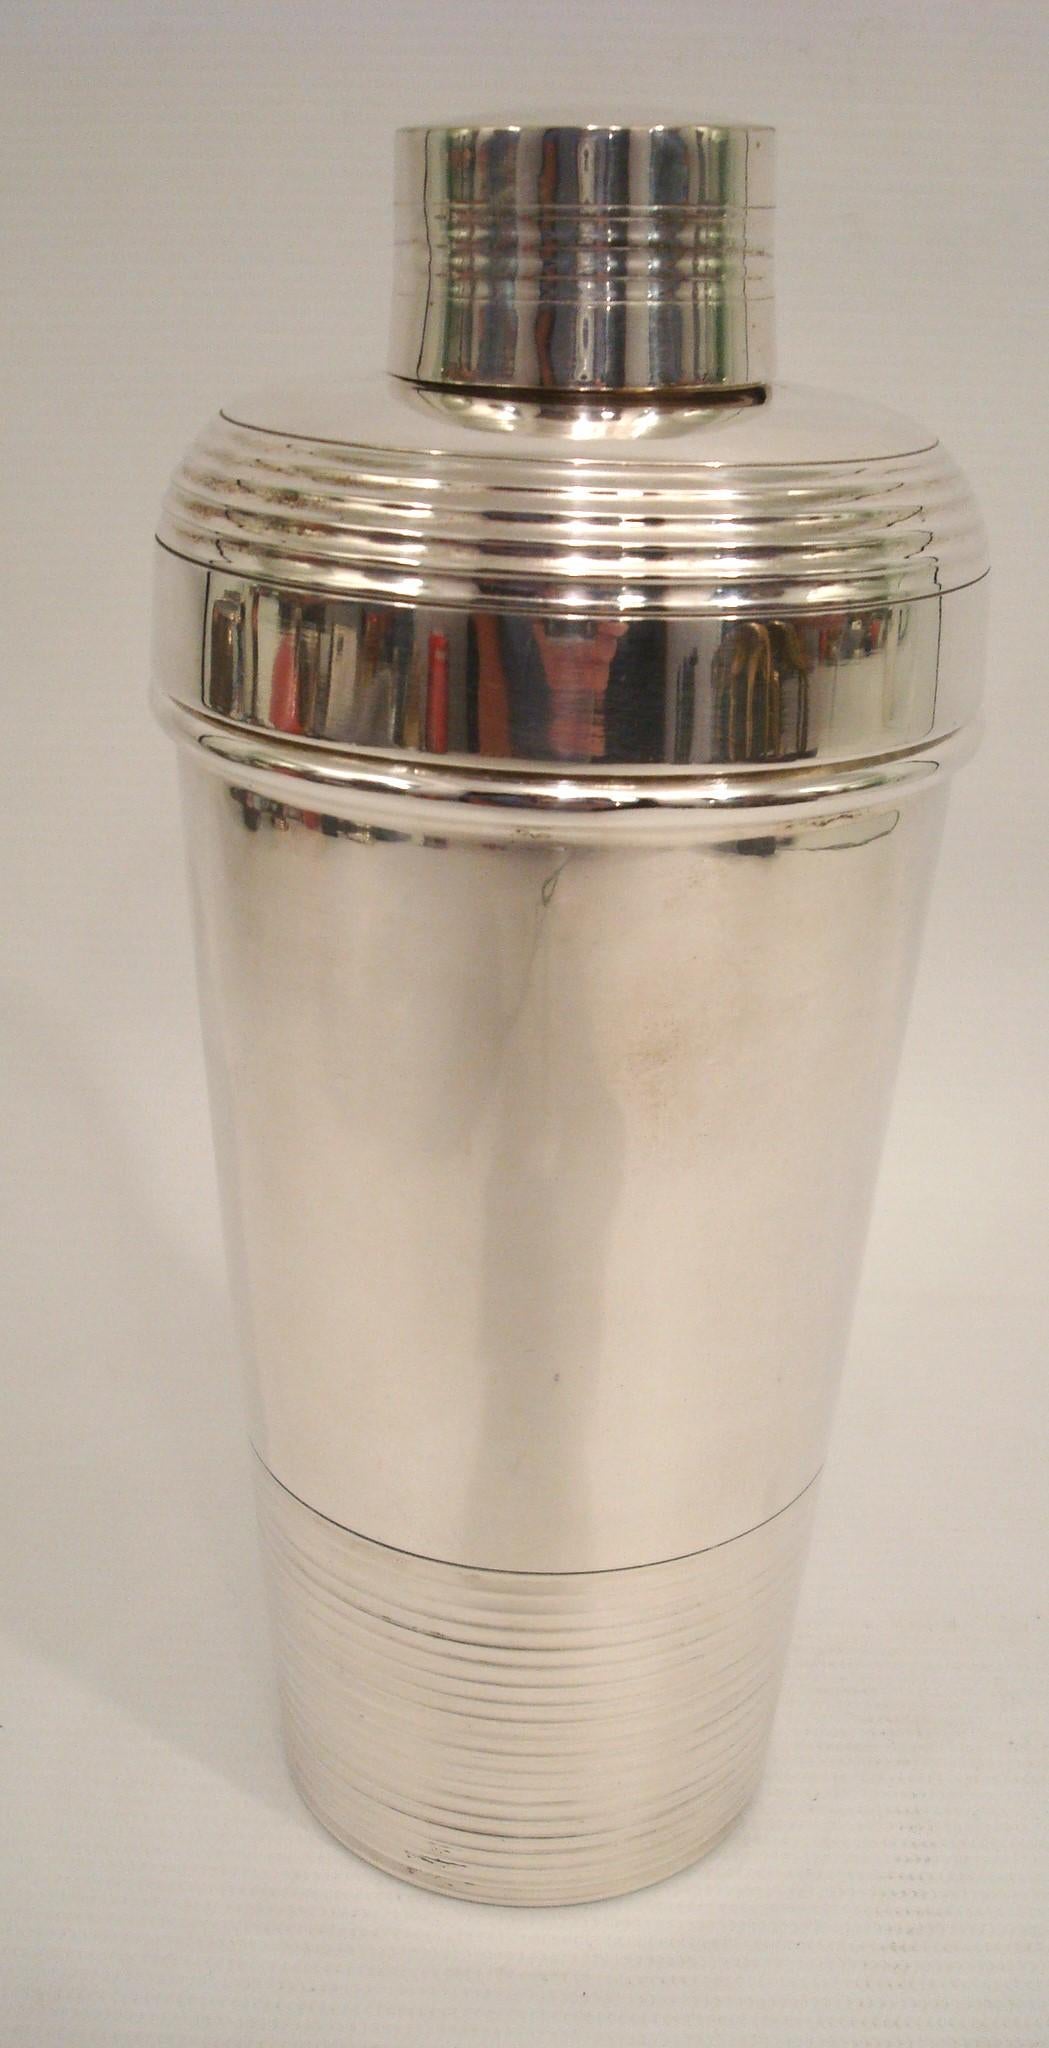 This fabulous French Art Deco silver plate cylindrical cocktail or Martini shaker was crafted by Hermes Paris, in the 1920s. The three-sectioned cocktail shaker has a removable cap and strainer. The piece boasts a lovely geometric shape with a